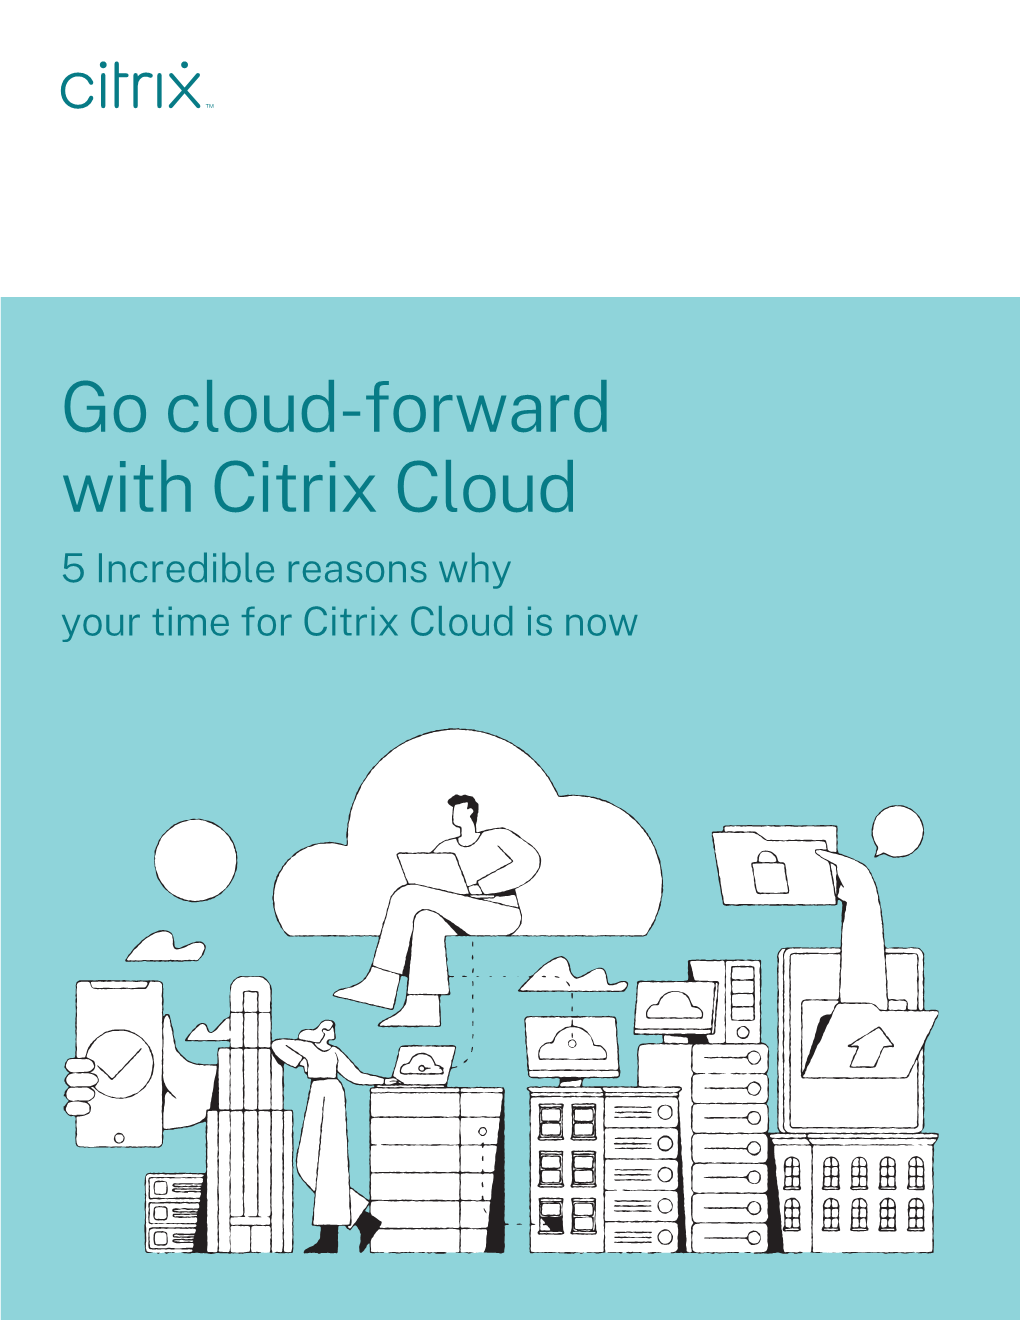 Go Cloud-Forward with Citrix Cloud 5 Incredible Reasons Why Your Time for Citrix Cloud Is Now 5 Incredible Reasons Why Your Time for Citrix Cloud Is Now 2